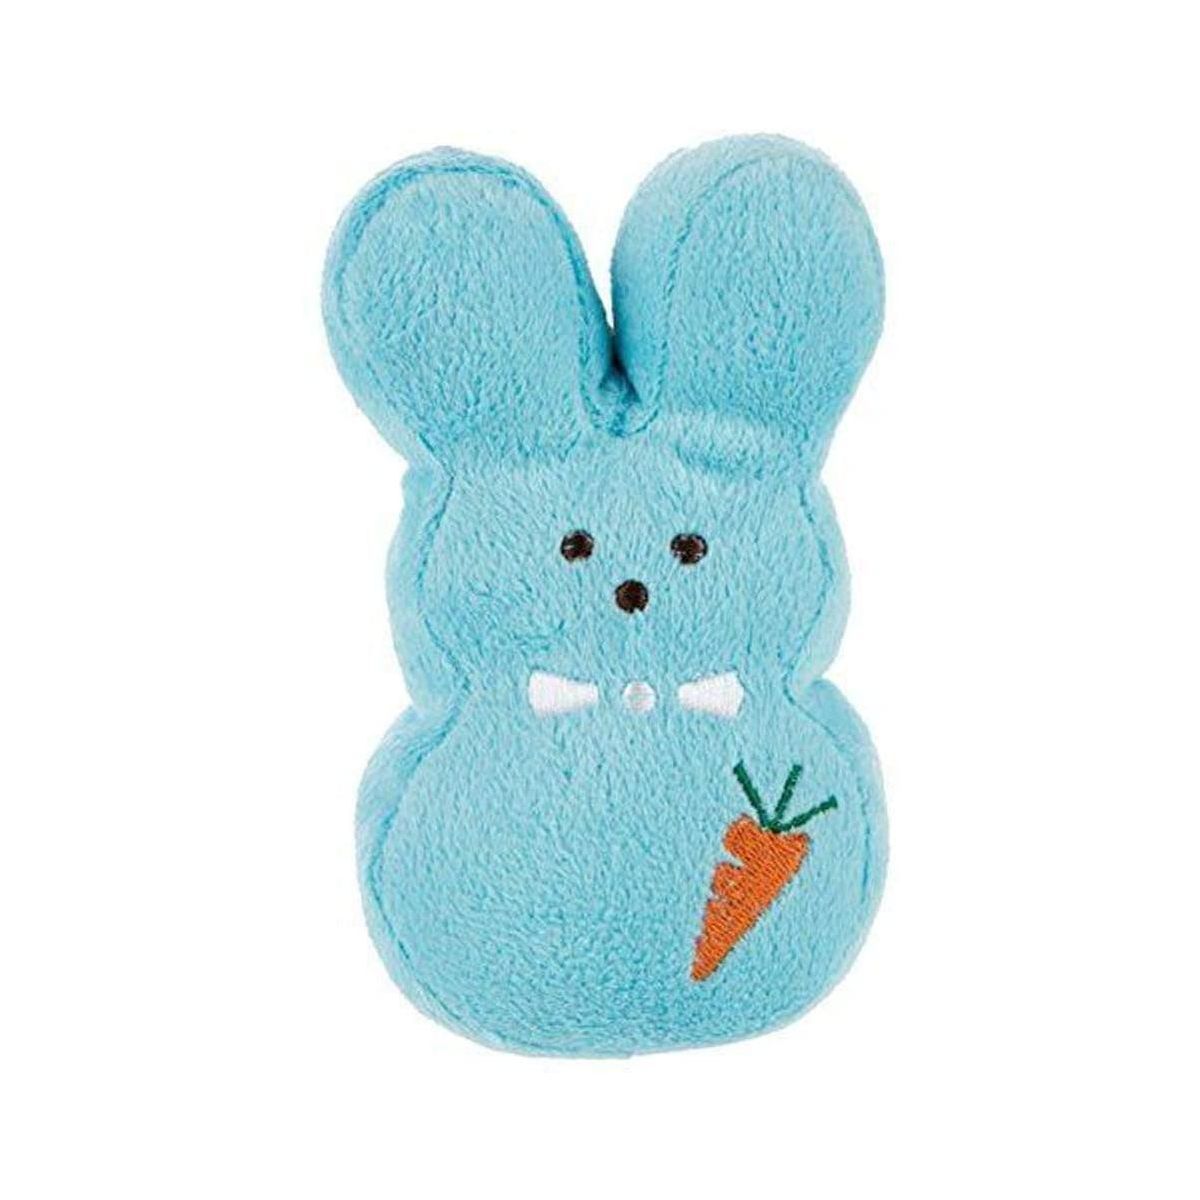 Peeps Plush Bunny Squeaky Toy (Blue) | Target